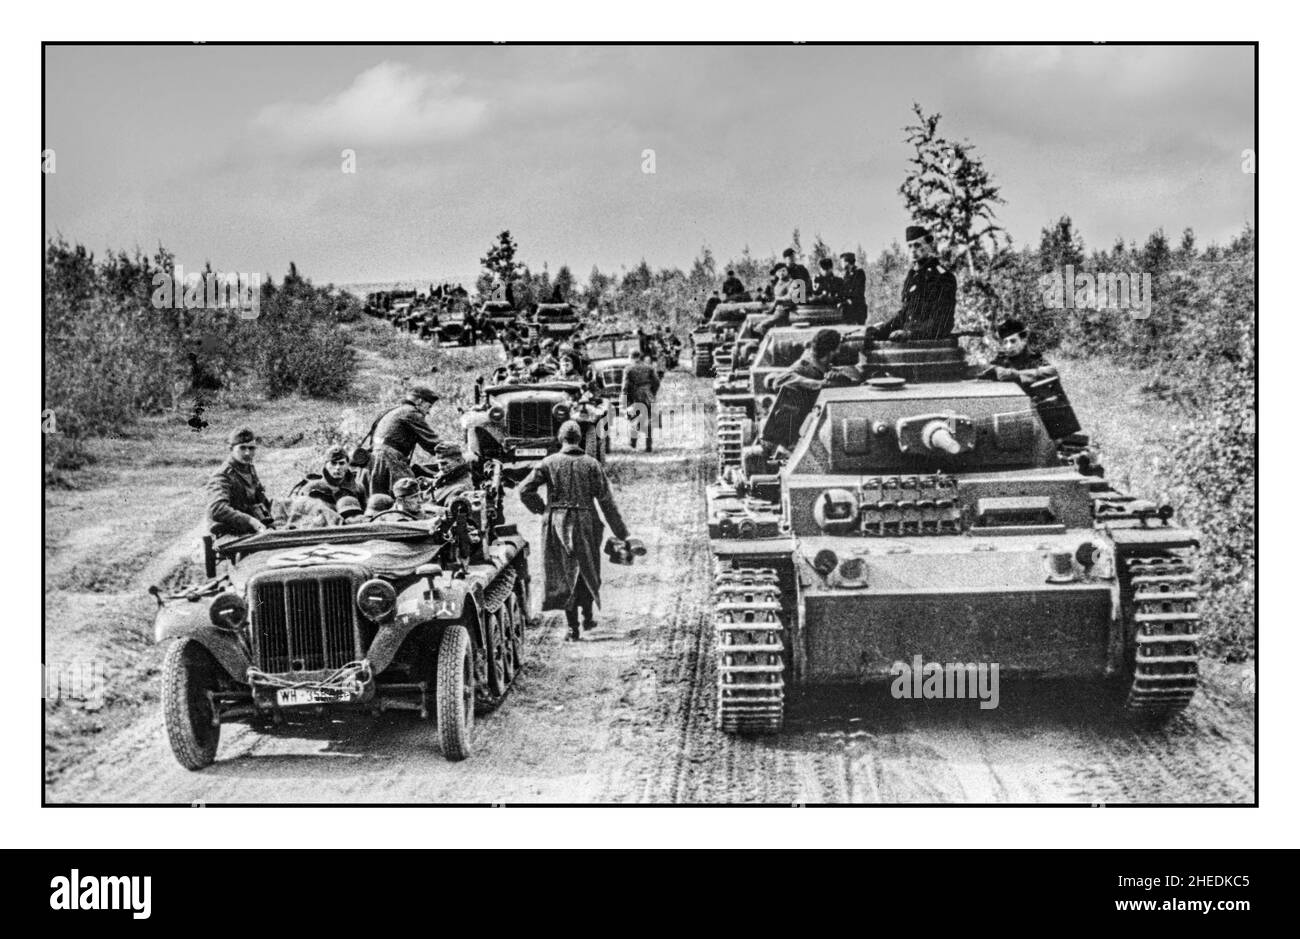 OPERATION BARBAROSSA WW2 A column of Nazi Germany  armoured forces, including PzKpfw III Ausf G tanks on a forest road on the Moscow front. 1941 Soviet Russia Operation Barbarossa, original name Operation Fritz, during World War II, code name for the German invasion of the Soviet Union, which was launched on June 22, 1941. The failure of German troops to defeat Soviet forces in the campaign signaled a crucial turning point in the war. Stock Photo